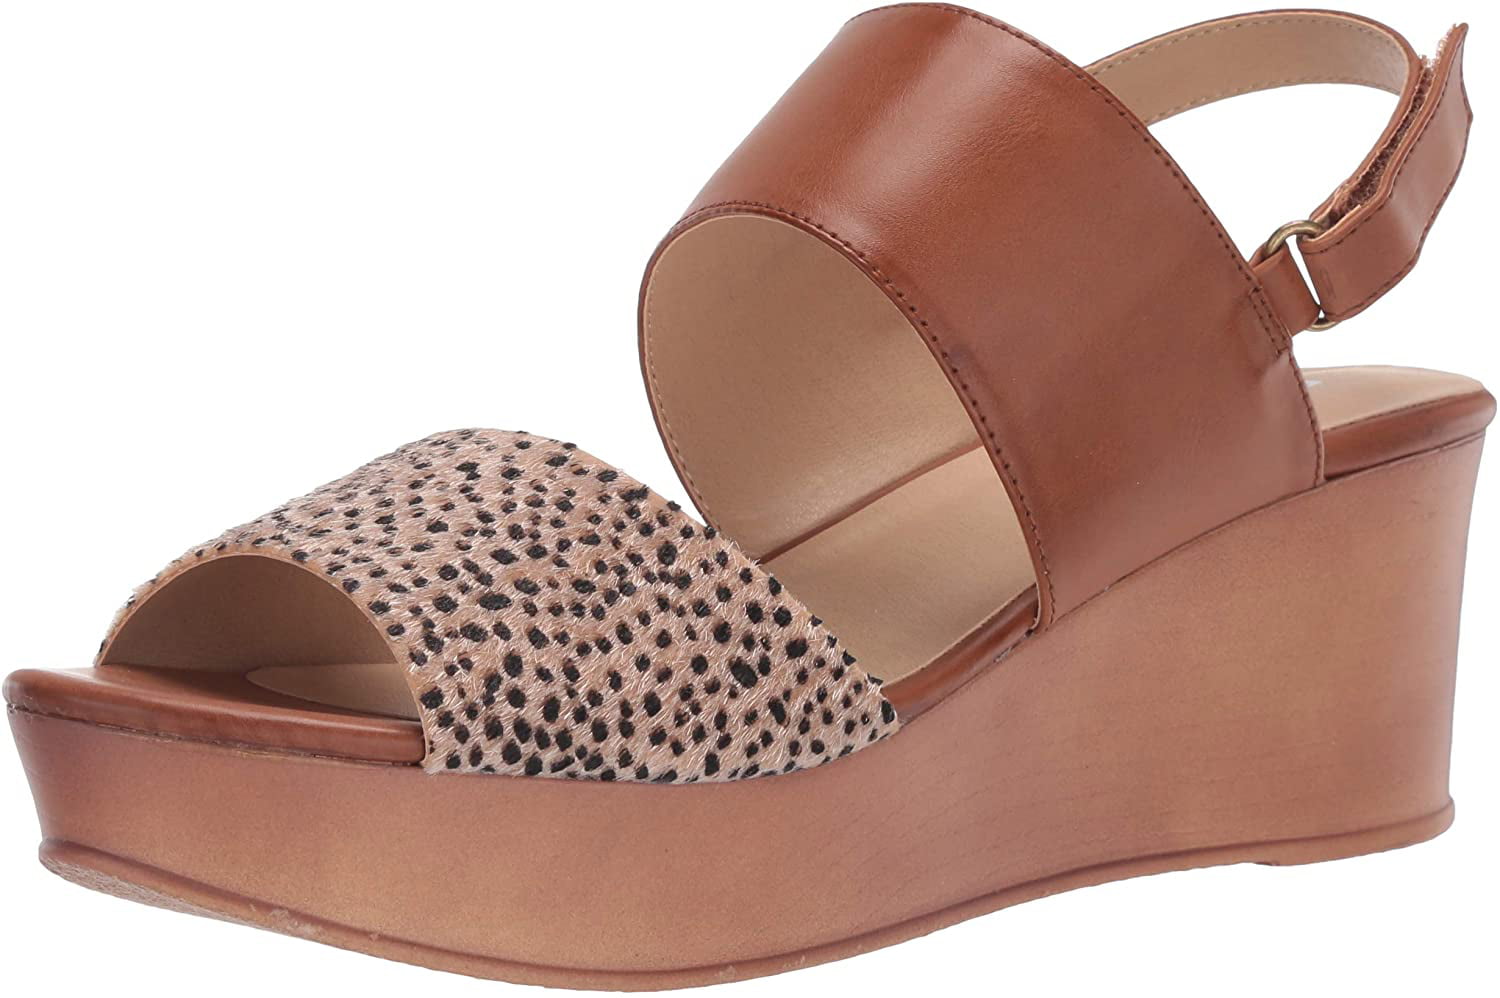 CL by Chinese Laundry Womens Wedge Sandal